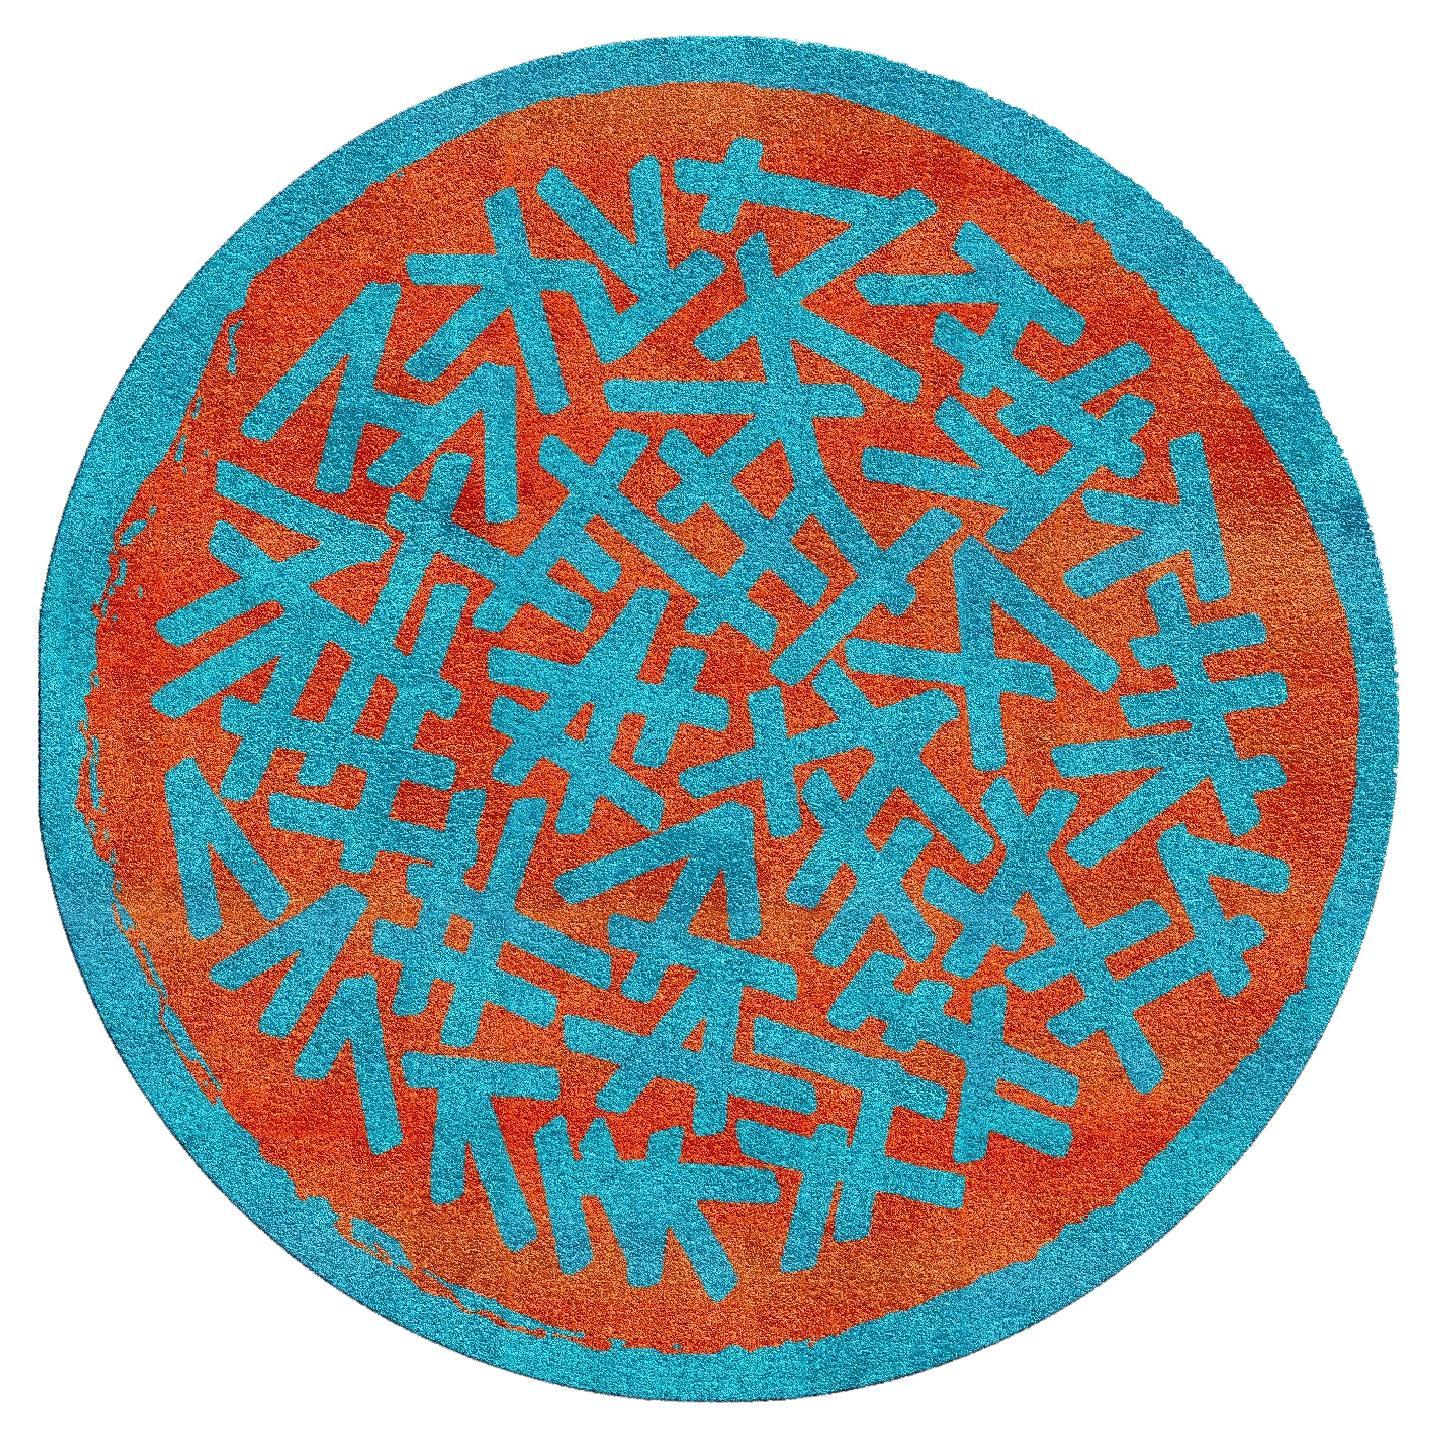 Circular Rug I by Raul For Sale